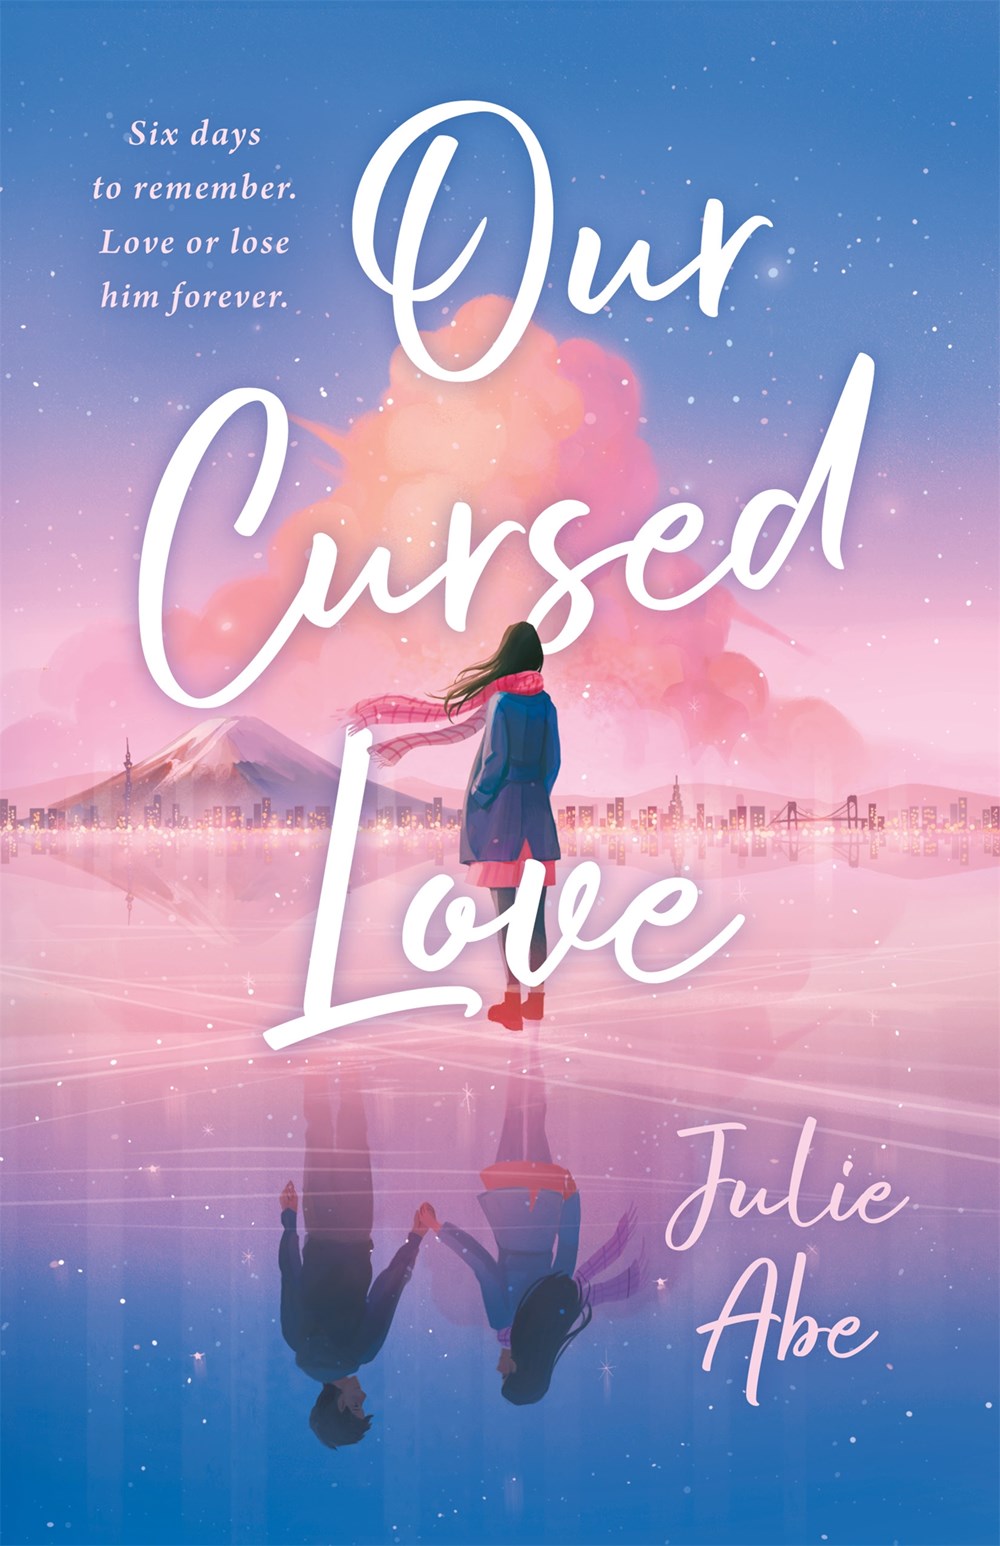 Our Cursed Love by Julie Abe (Hardcover) (PREORDER)